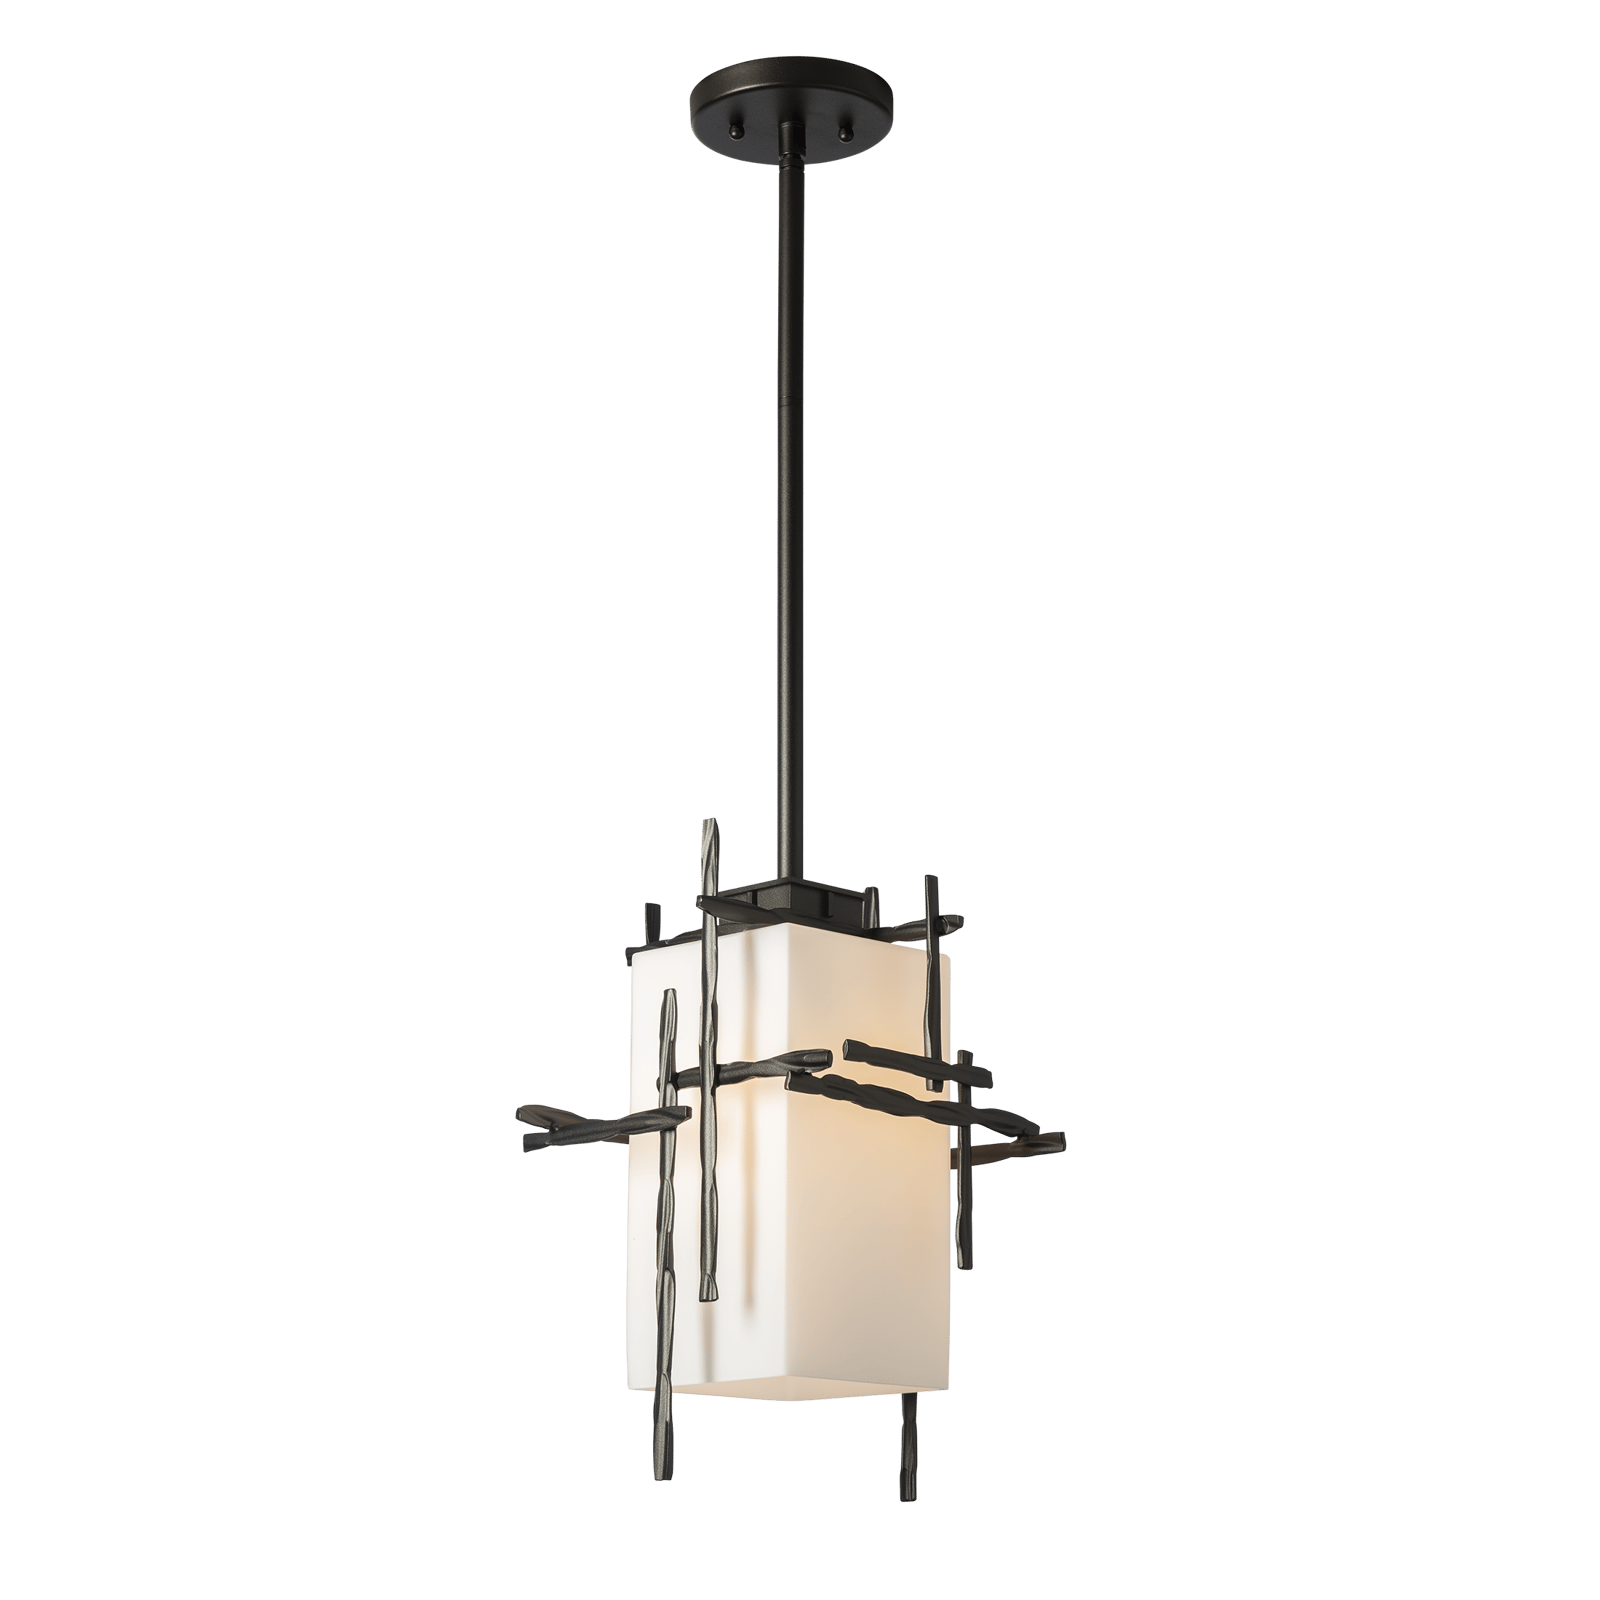 Hubbardton Forge Tura Outdoor Pendant Outdoor Light Fixture l Hanging Hubbardton Forge Coastal Oil Rubbed Bronze Opal Glass (GG) 